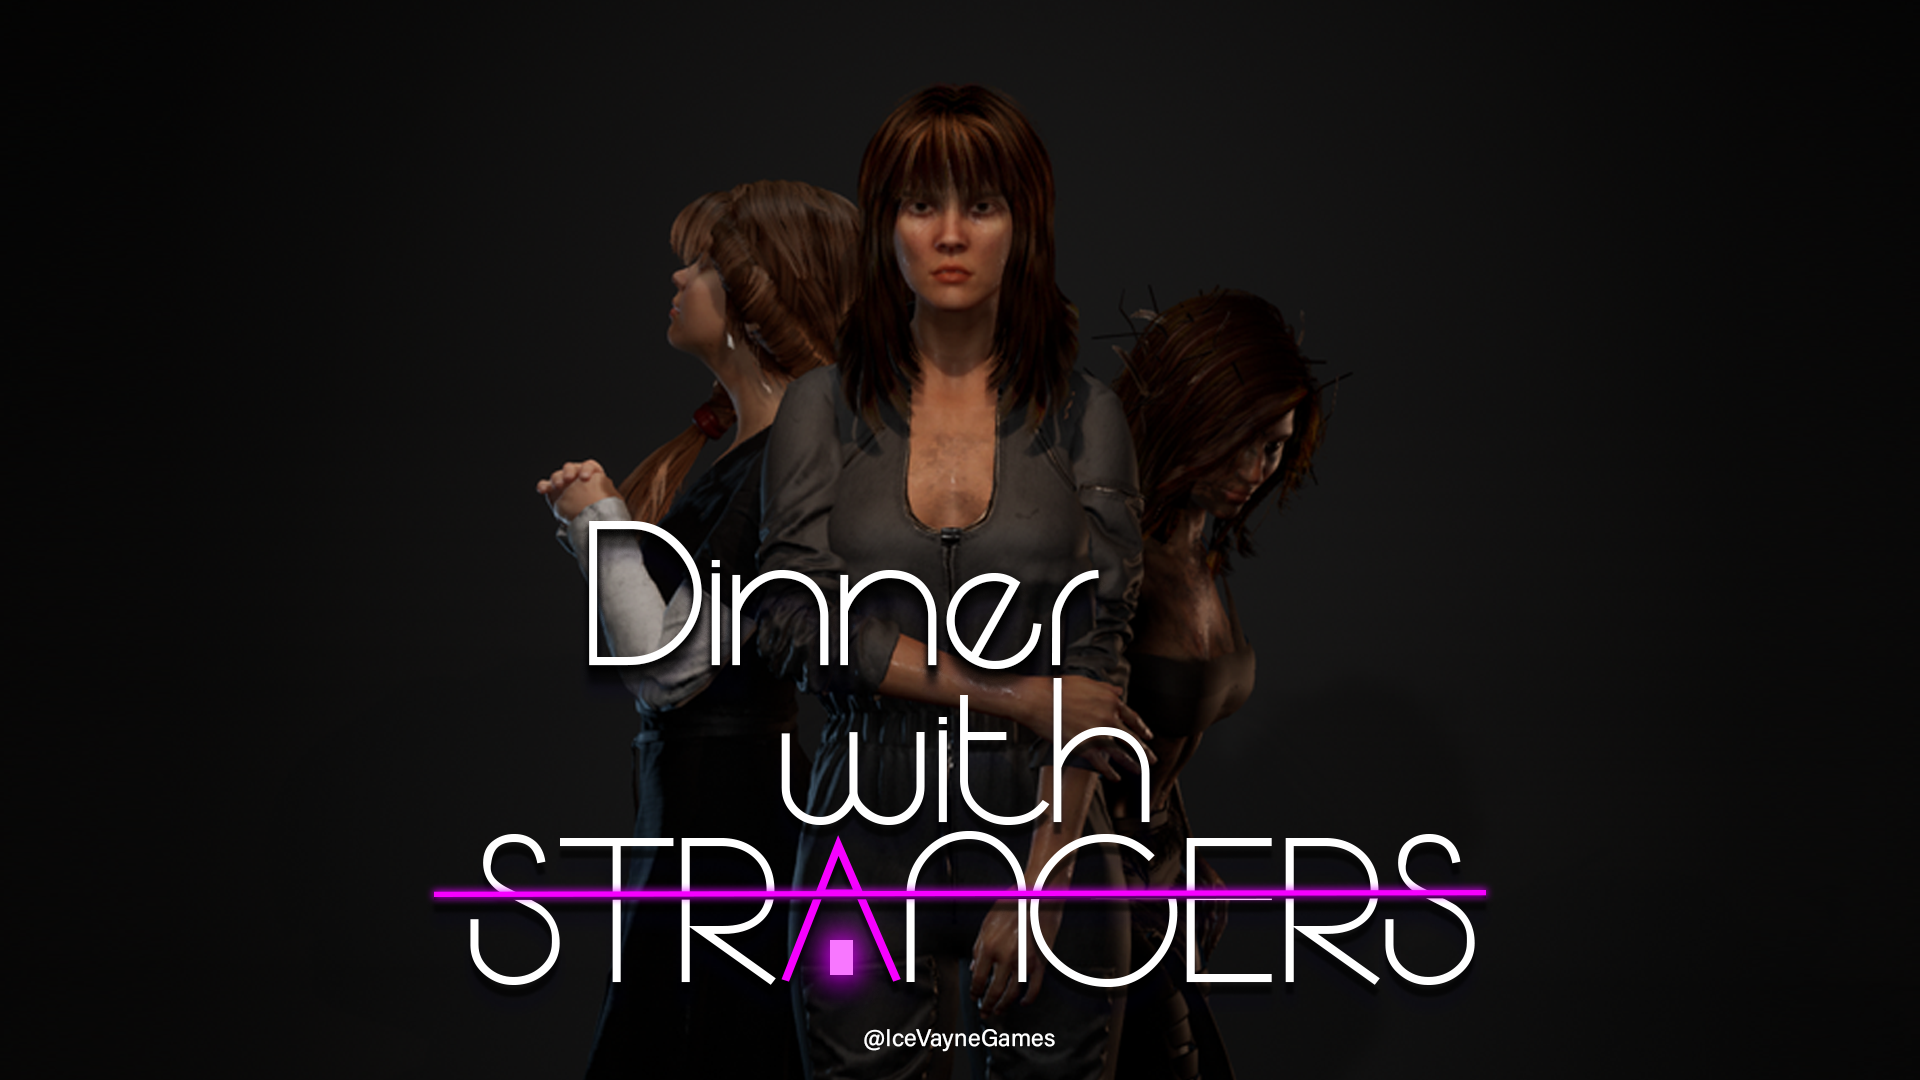 Dinner With Strangers - Demo